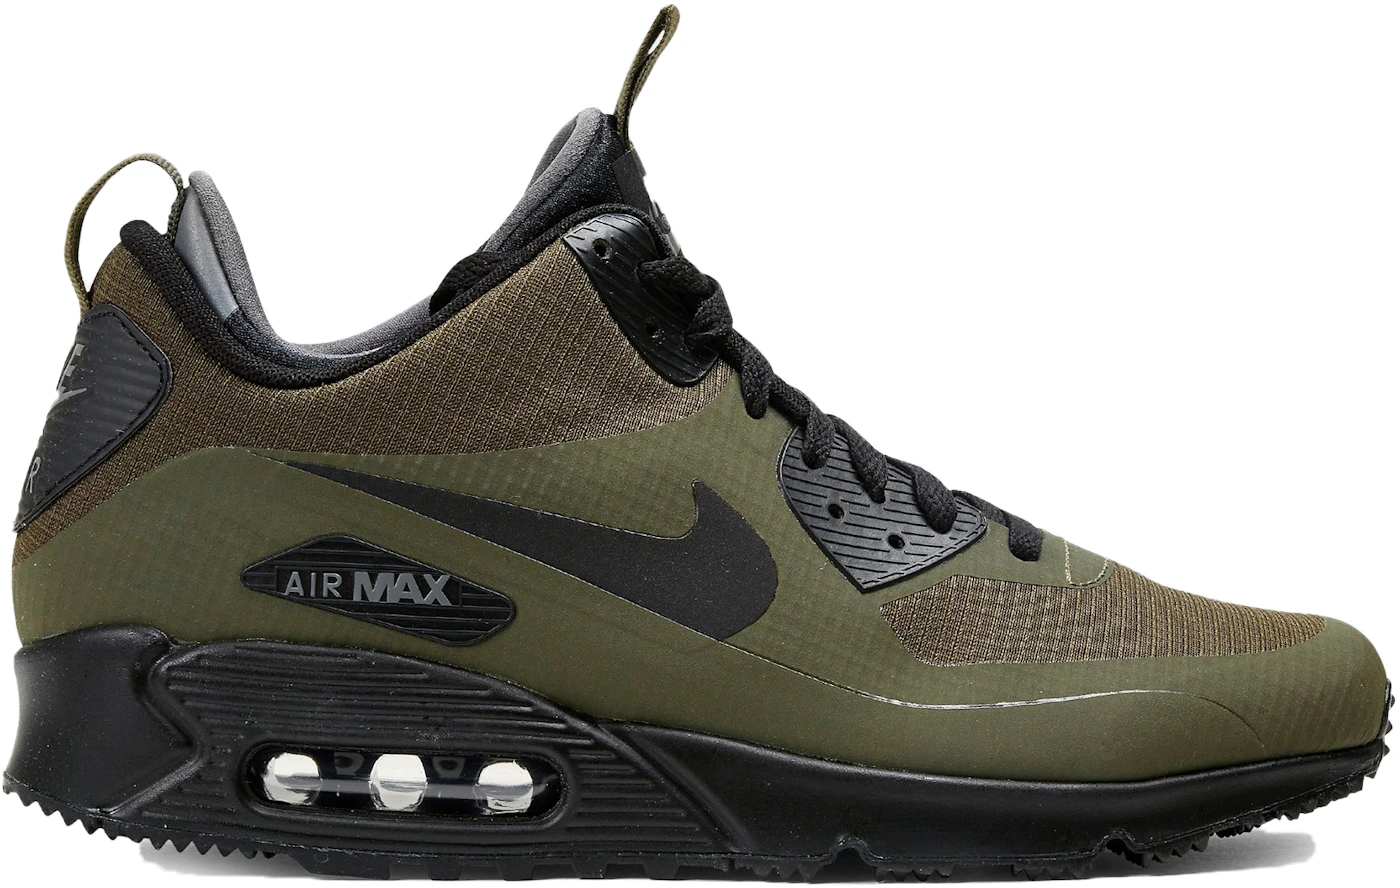 Nike Air Max 90 Winter Mid Loden Men's - 806808-300 - US